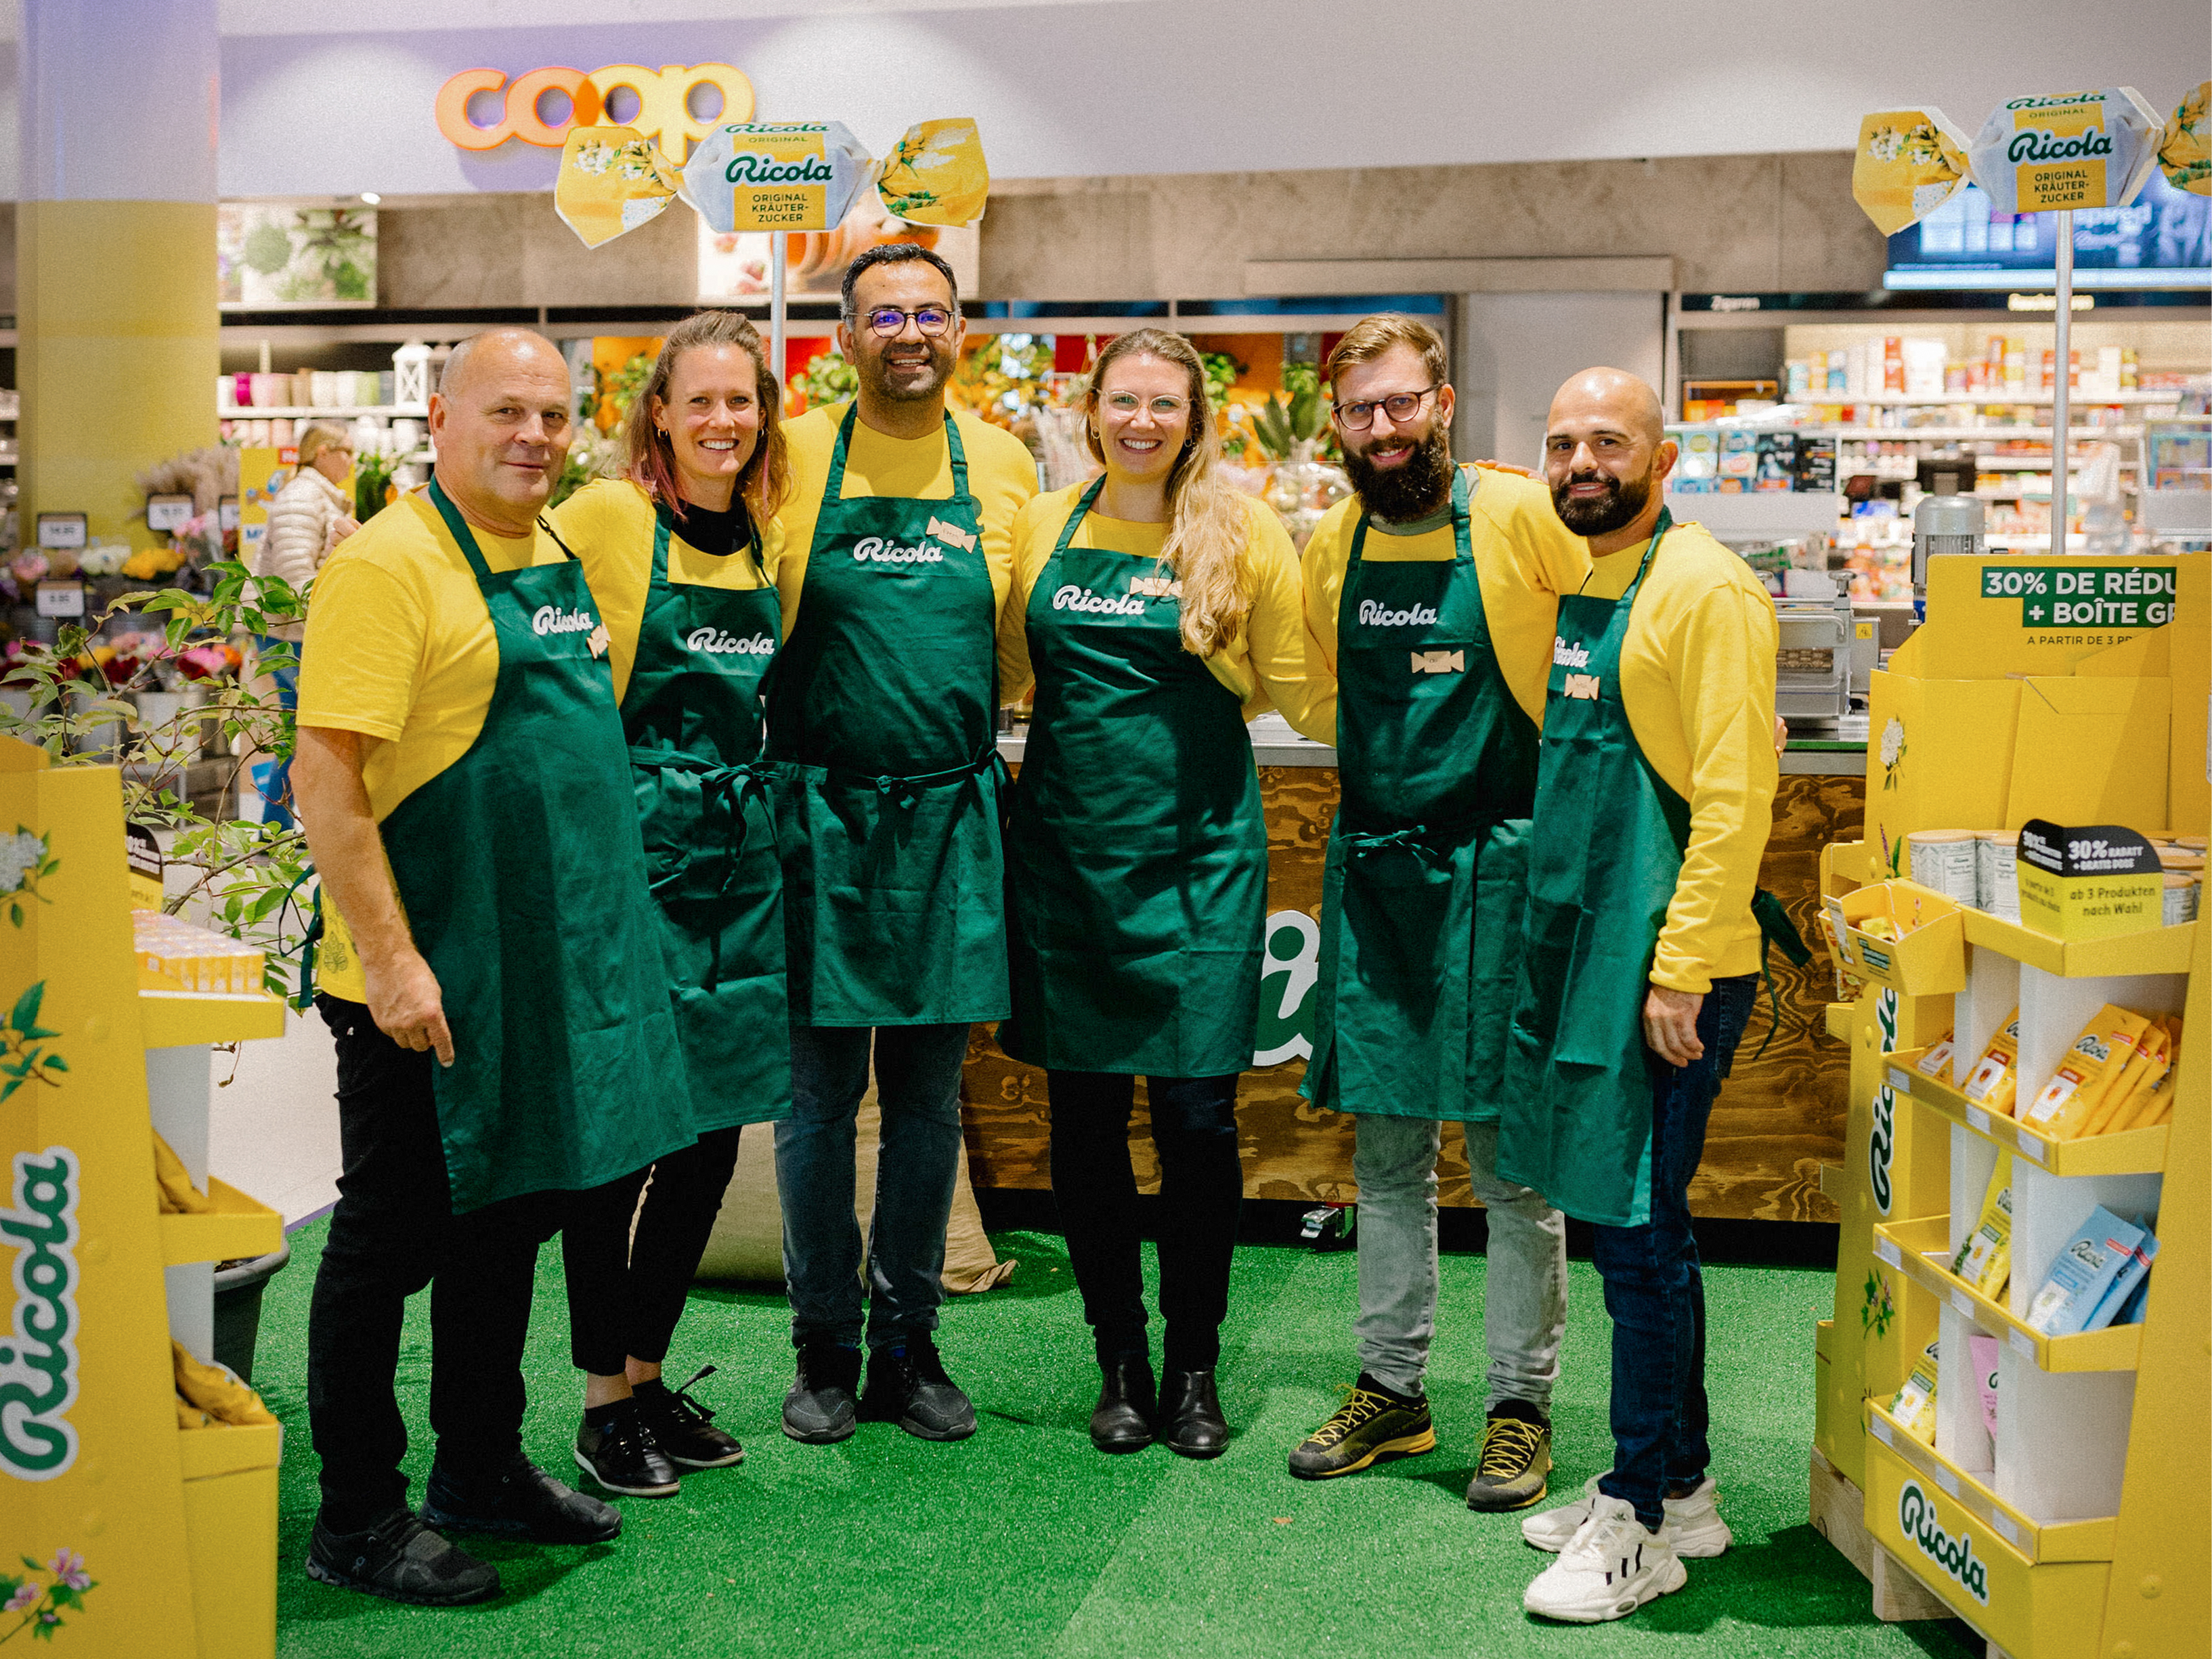 USP Partner deliver historic in-store activation for Ricola